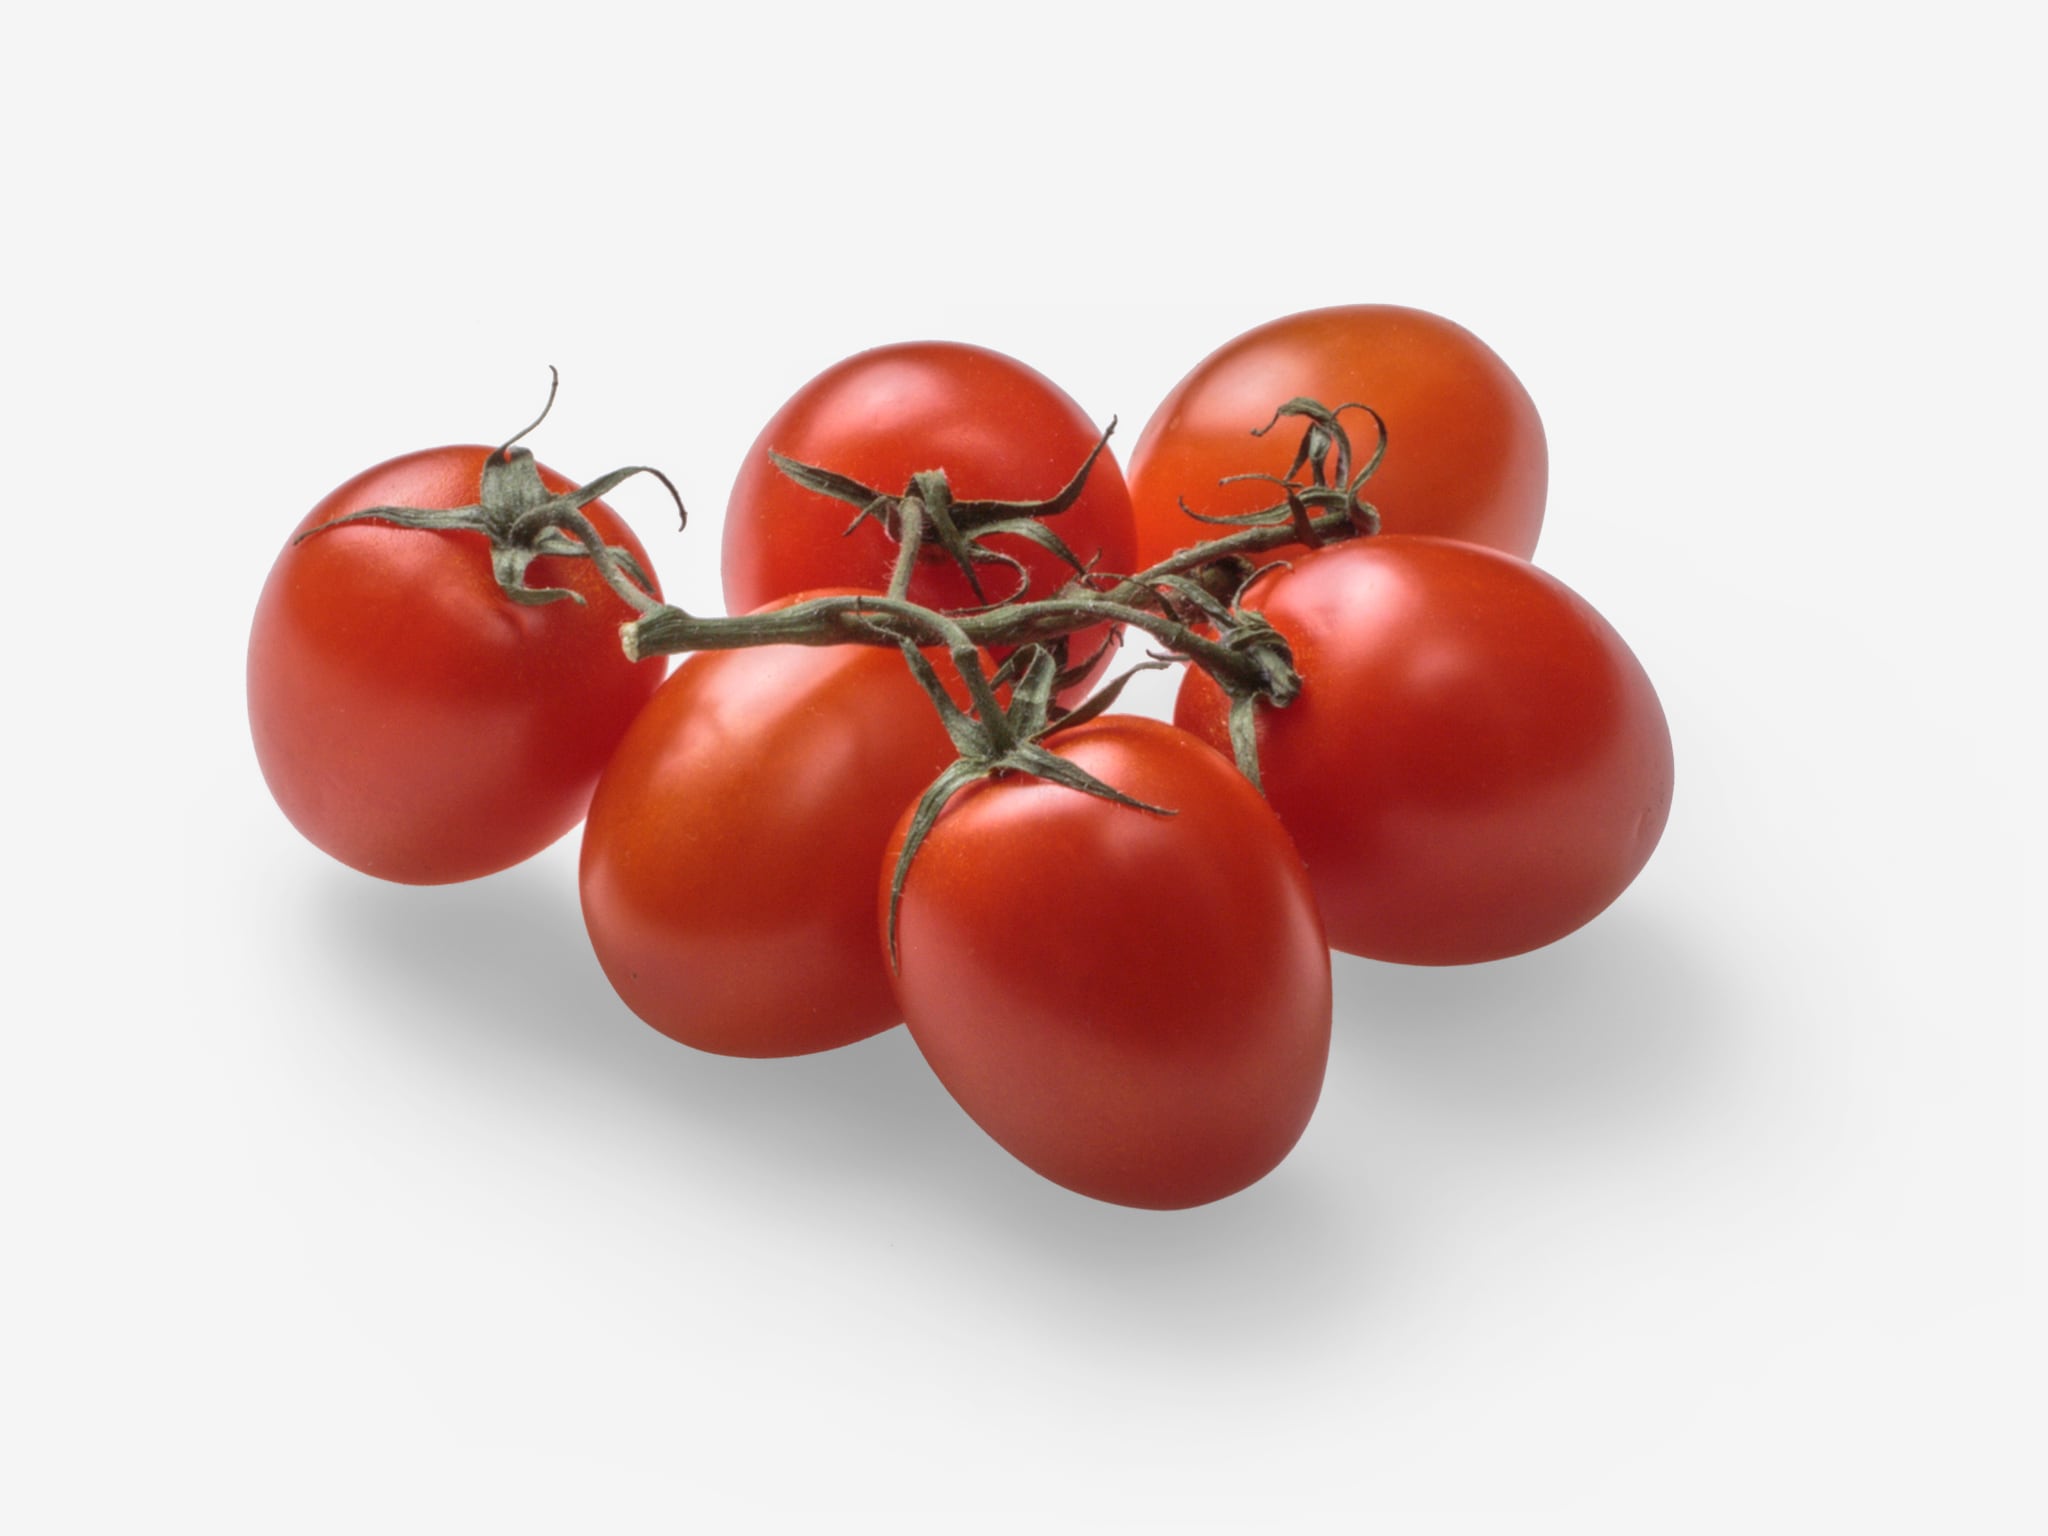 Tomato PSD image with transparent background